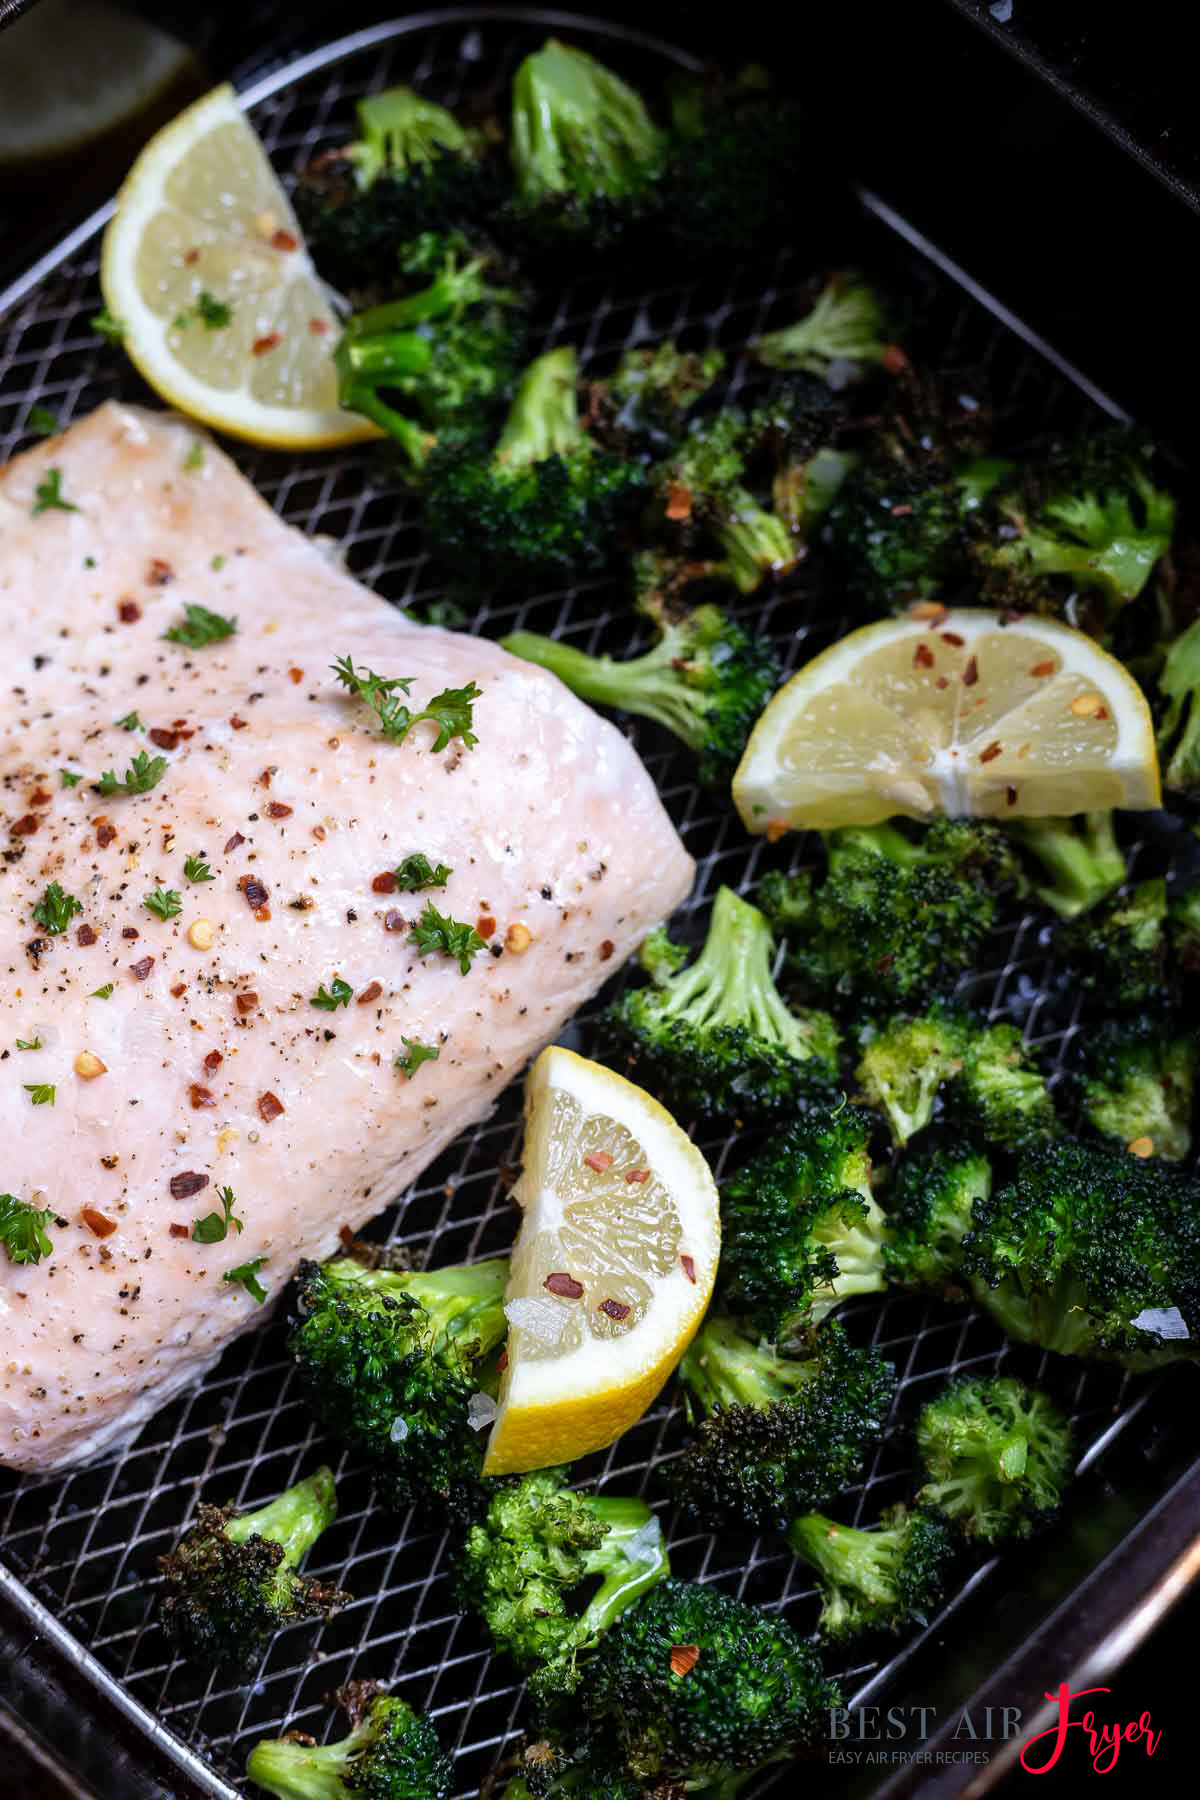 Salmon and Broccoli in Air Fryer